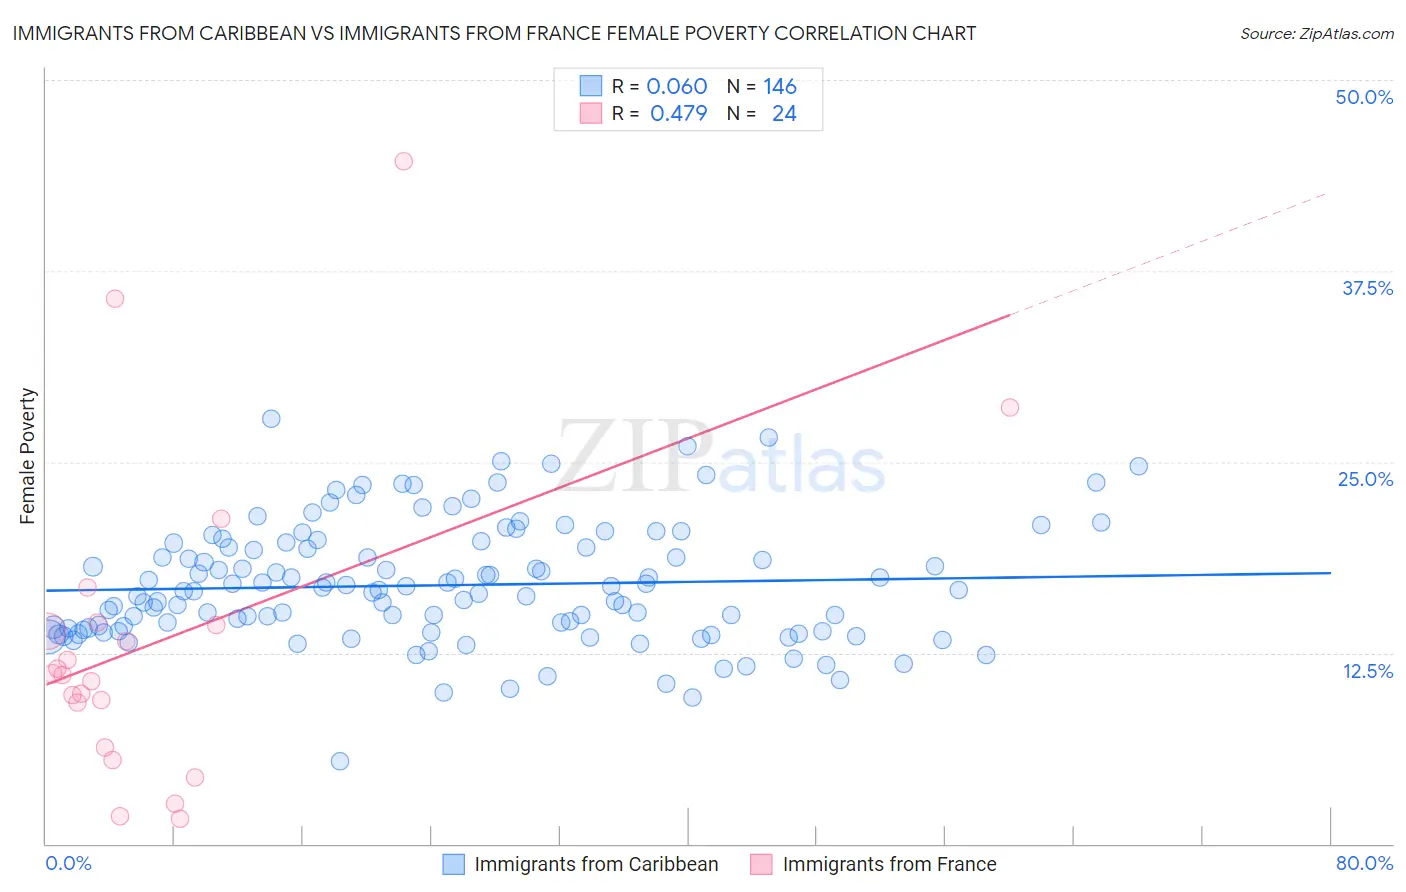 Immigrants from Caribbean vs Immigrants from France Female Poverty